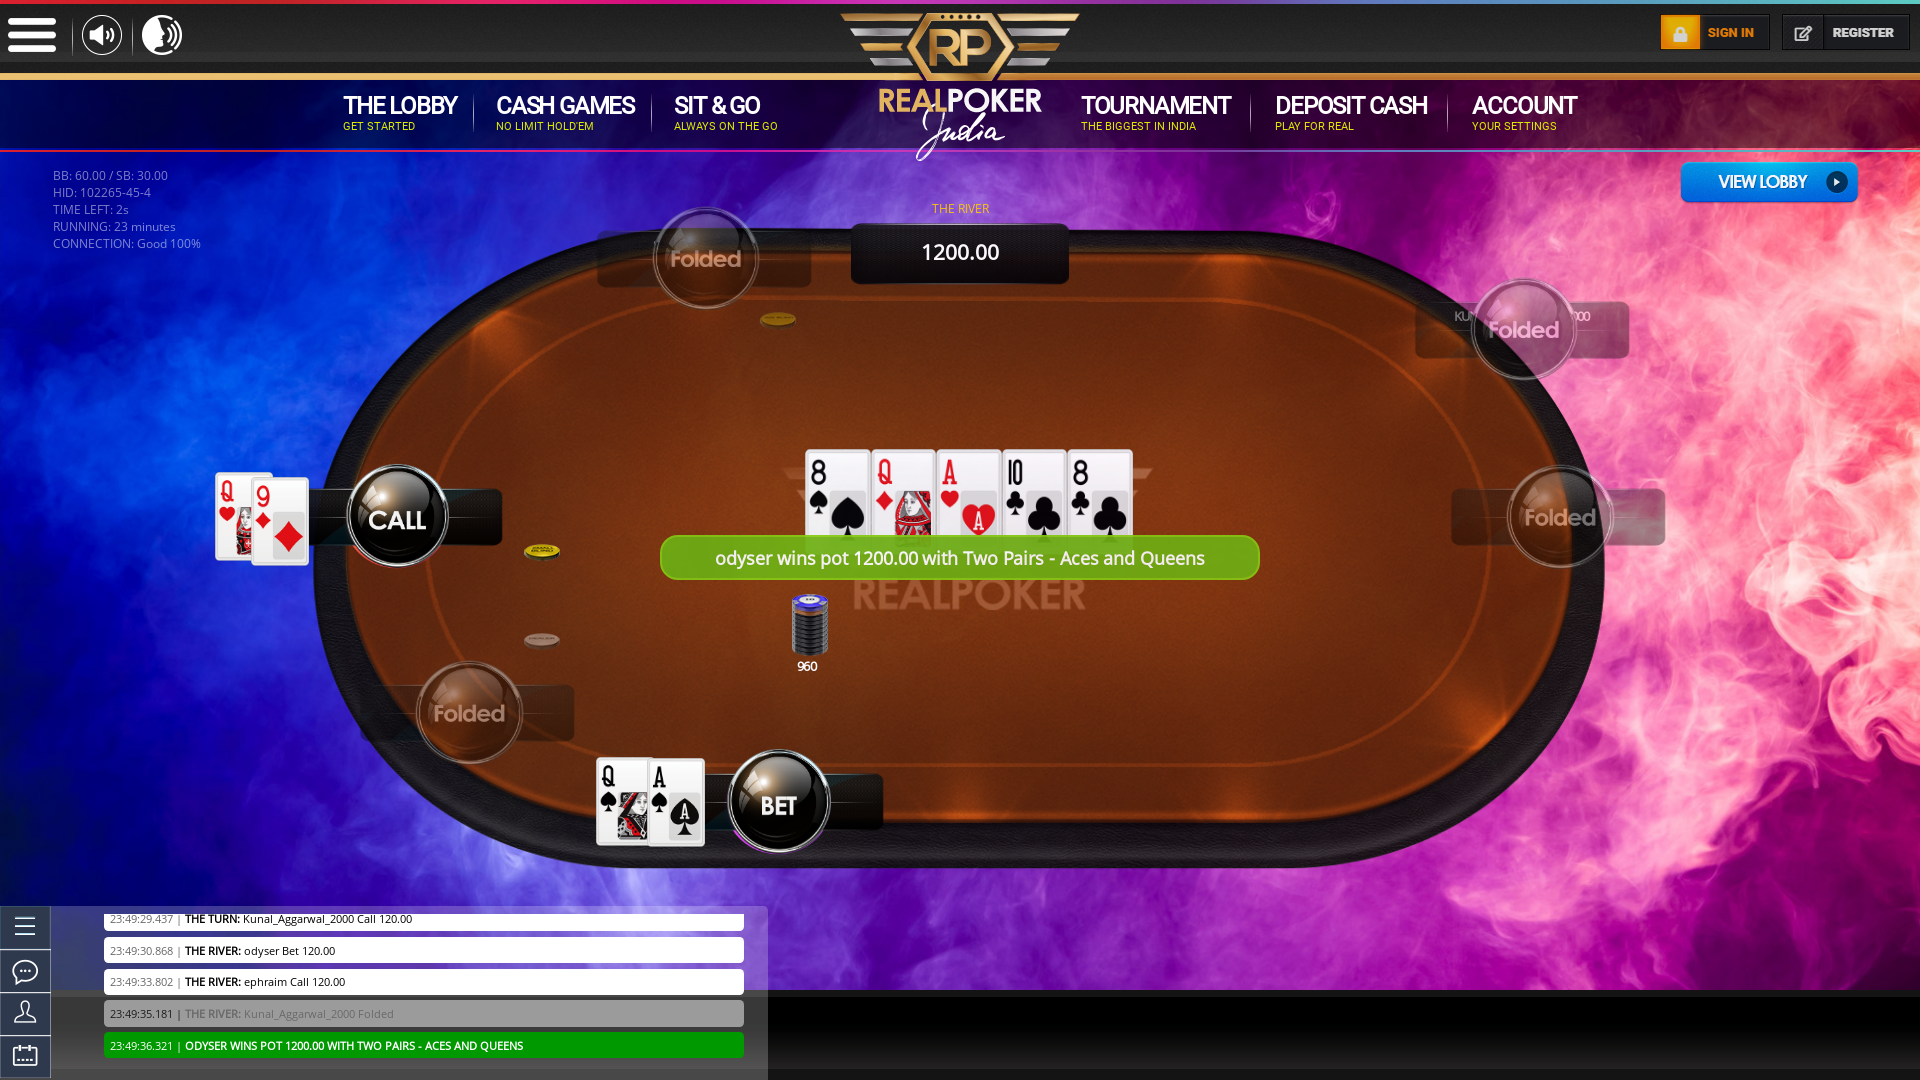 10 player poker in the 23rd minute